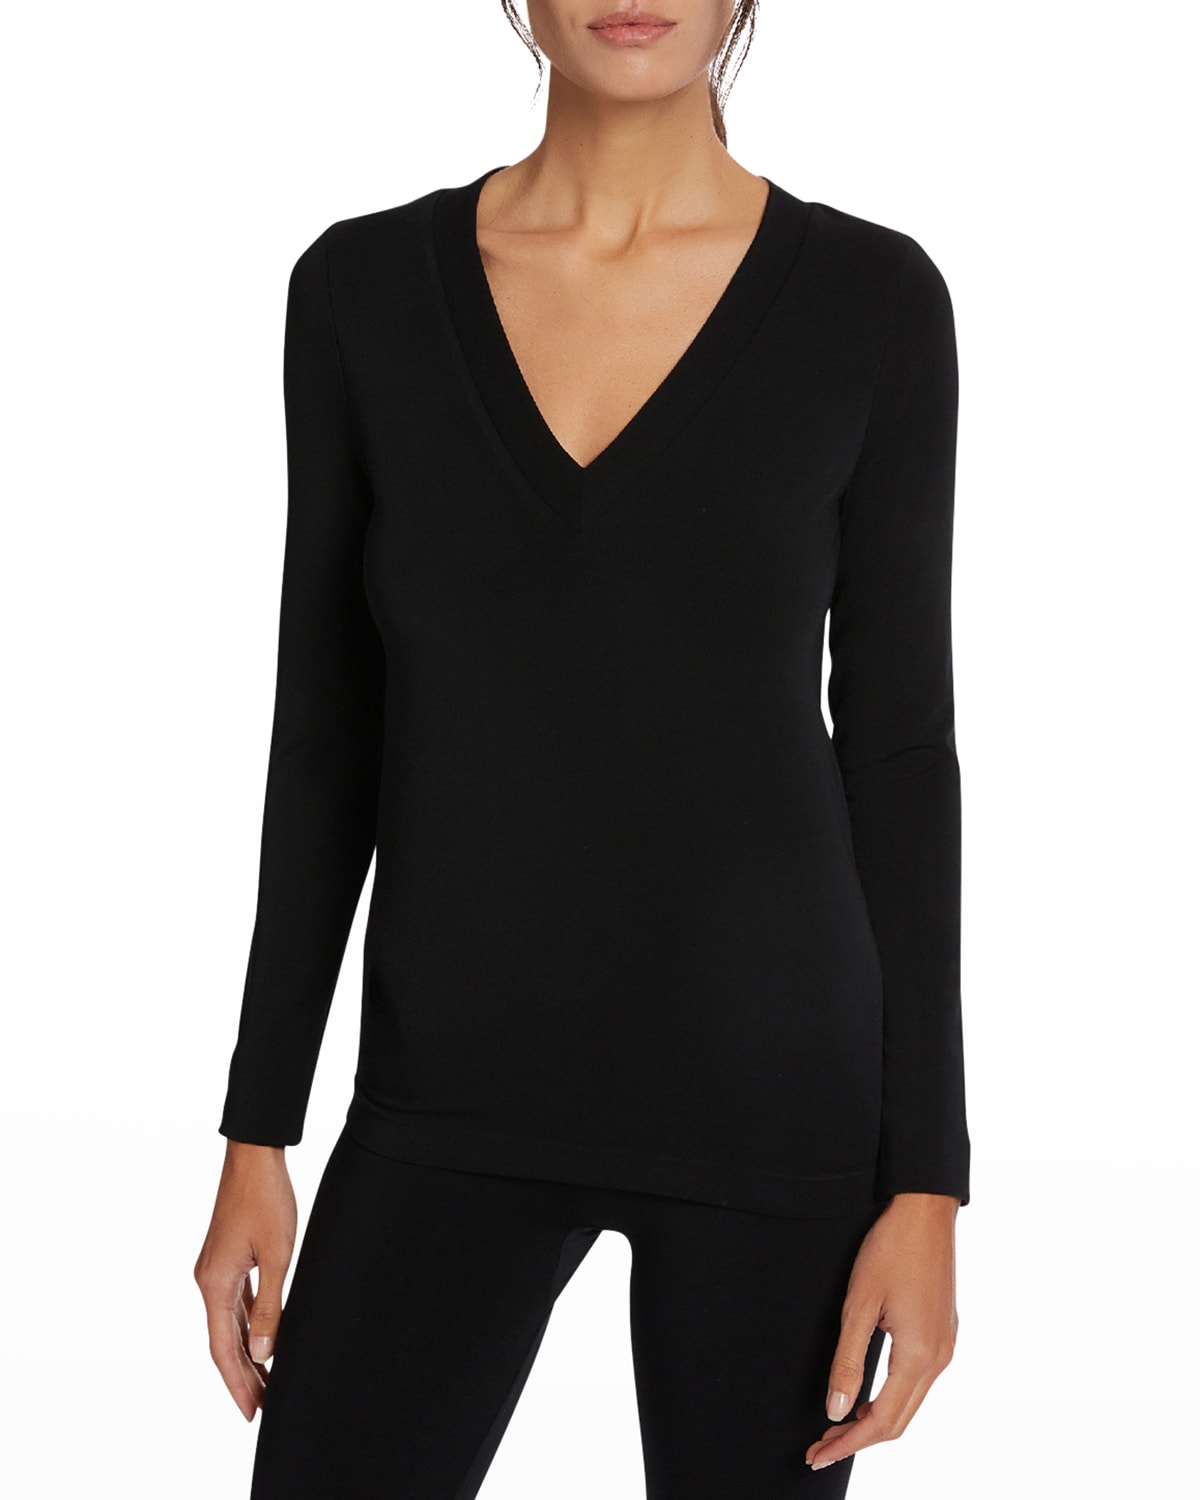 WOLFORD AURORA V-NECK LONG-SLEEVE TOP